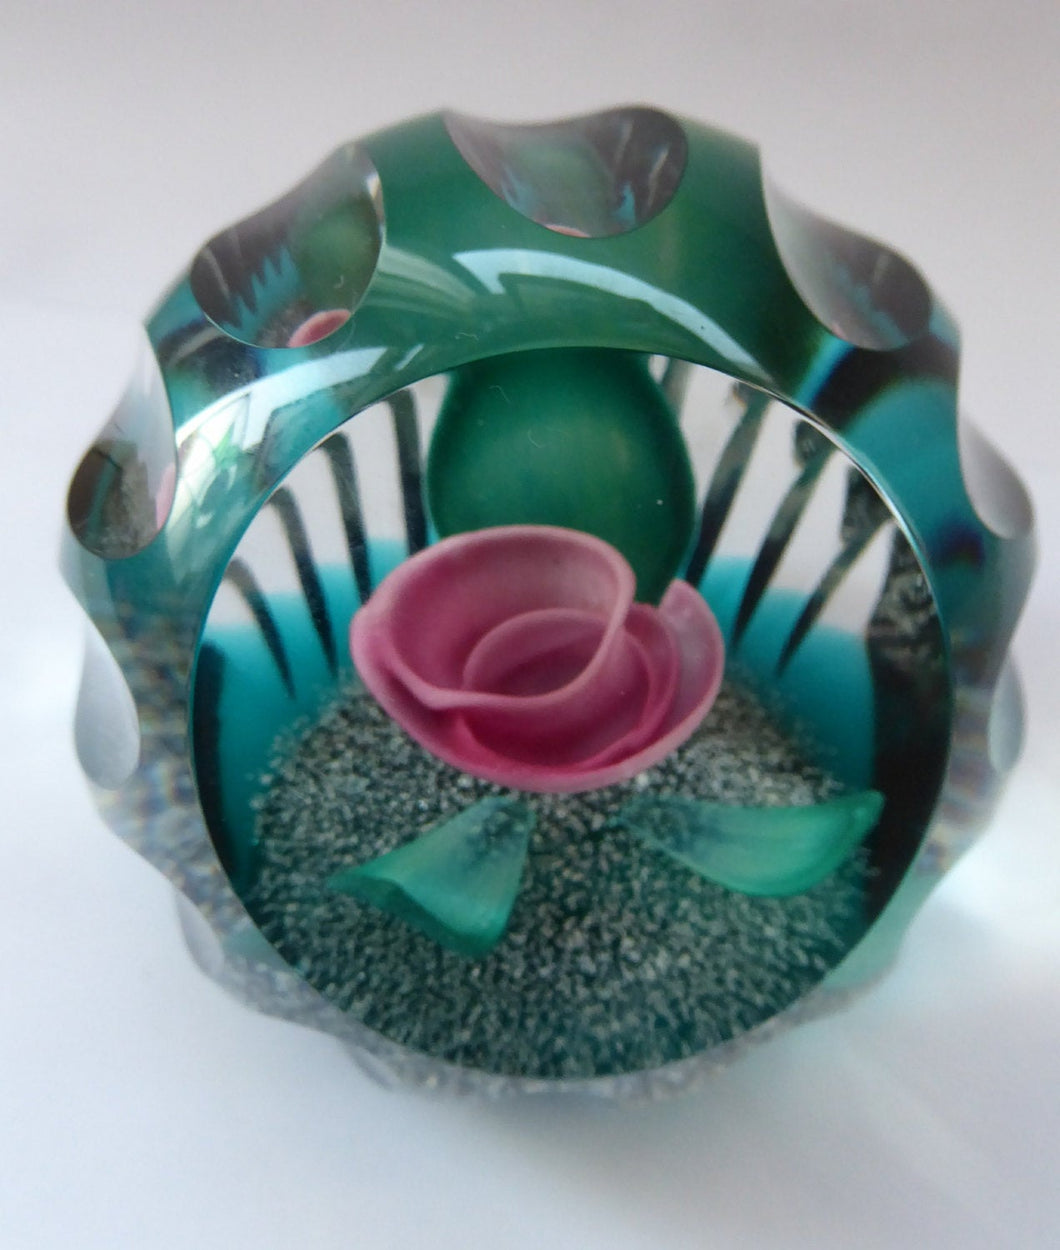 Rare 1994 Caithness Paperweight Blossom by Colin Terris